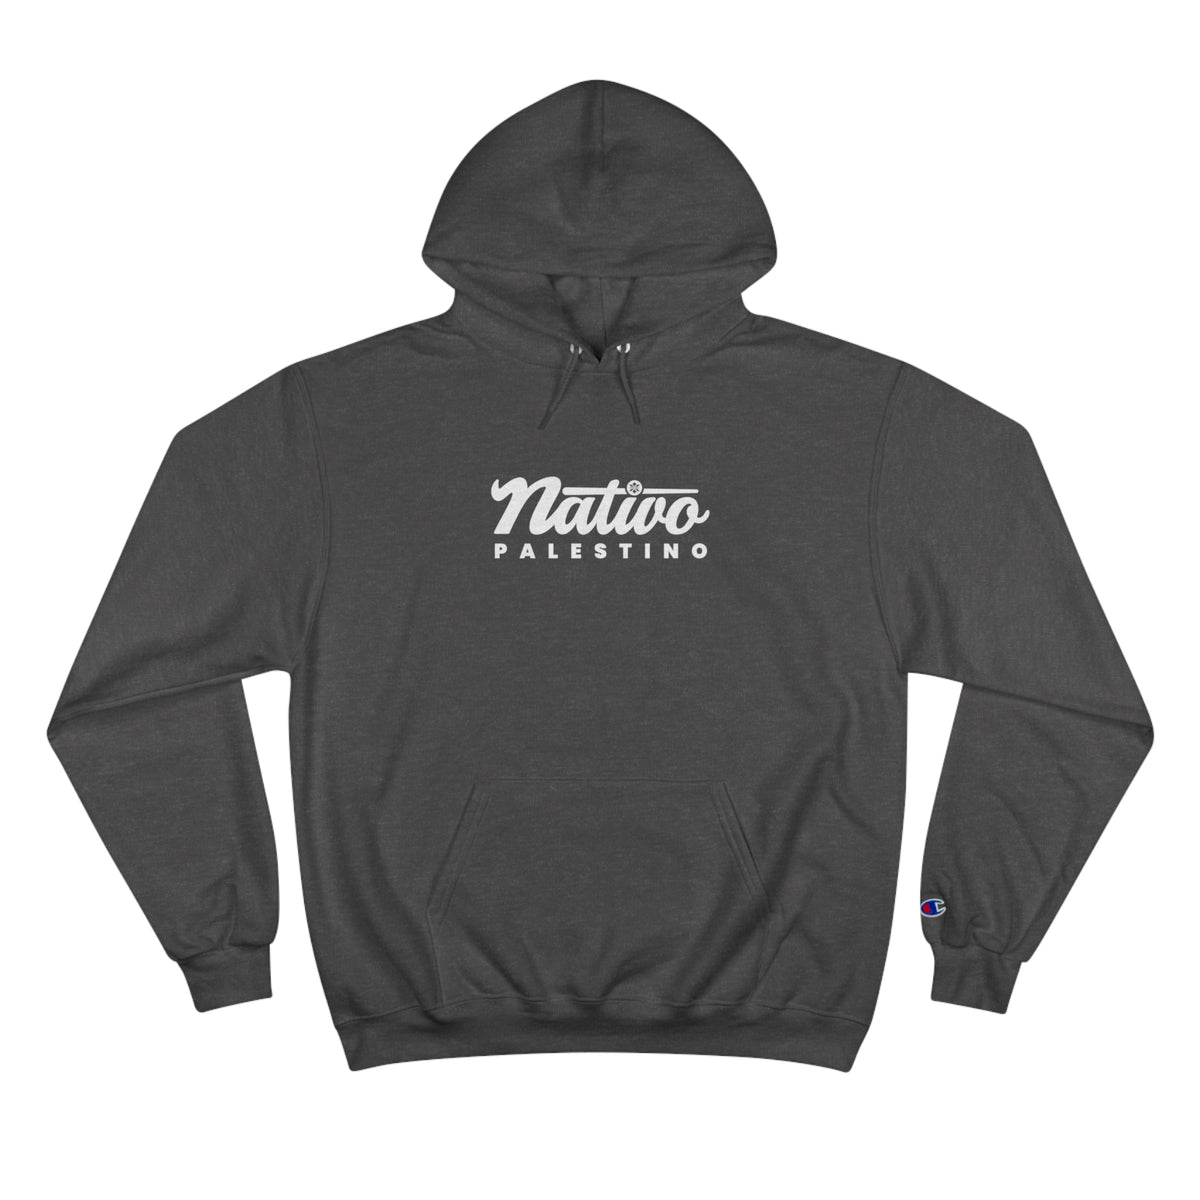 Freedom & Justice Palestine clothing store